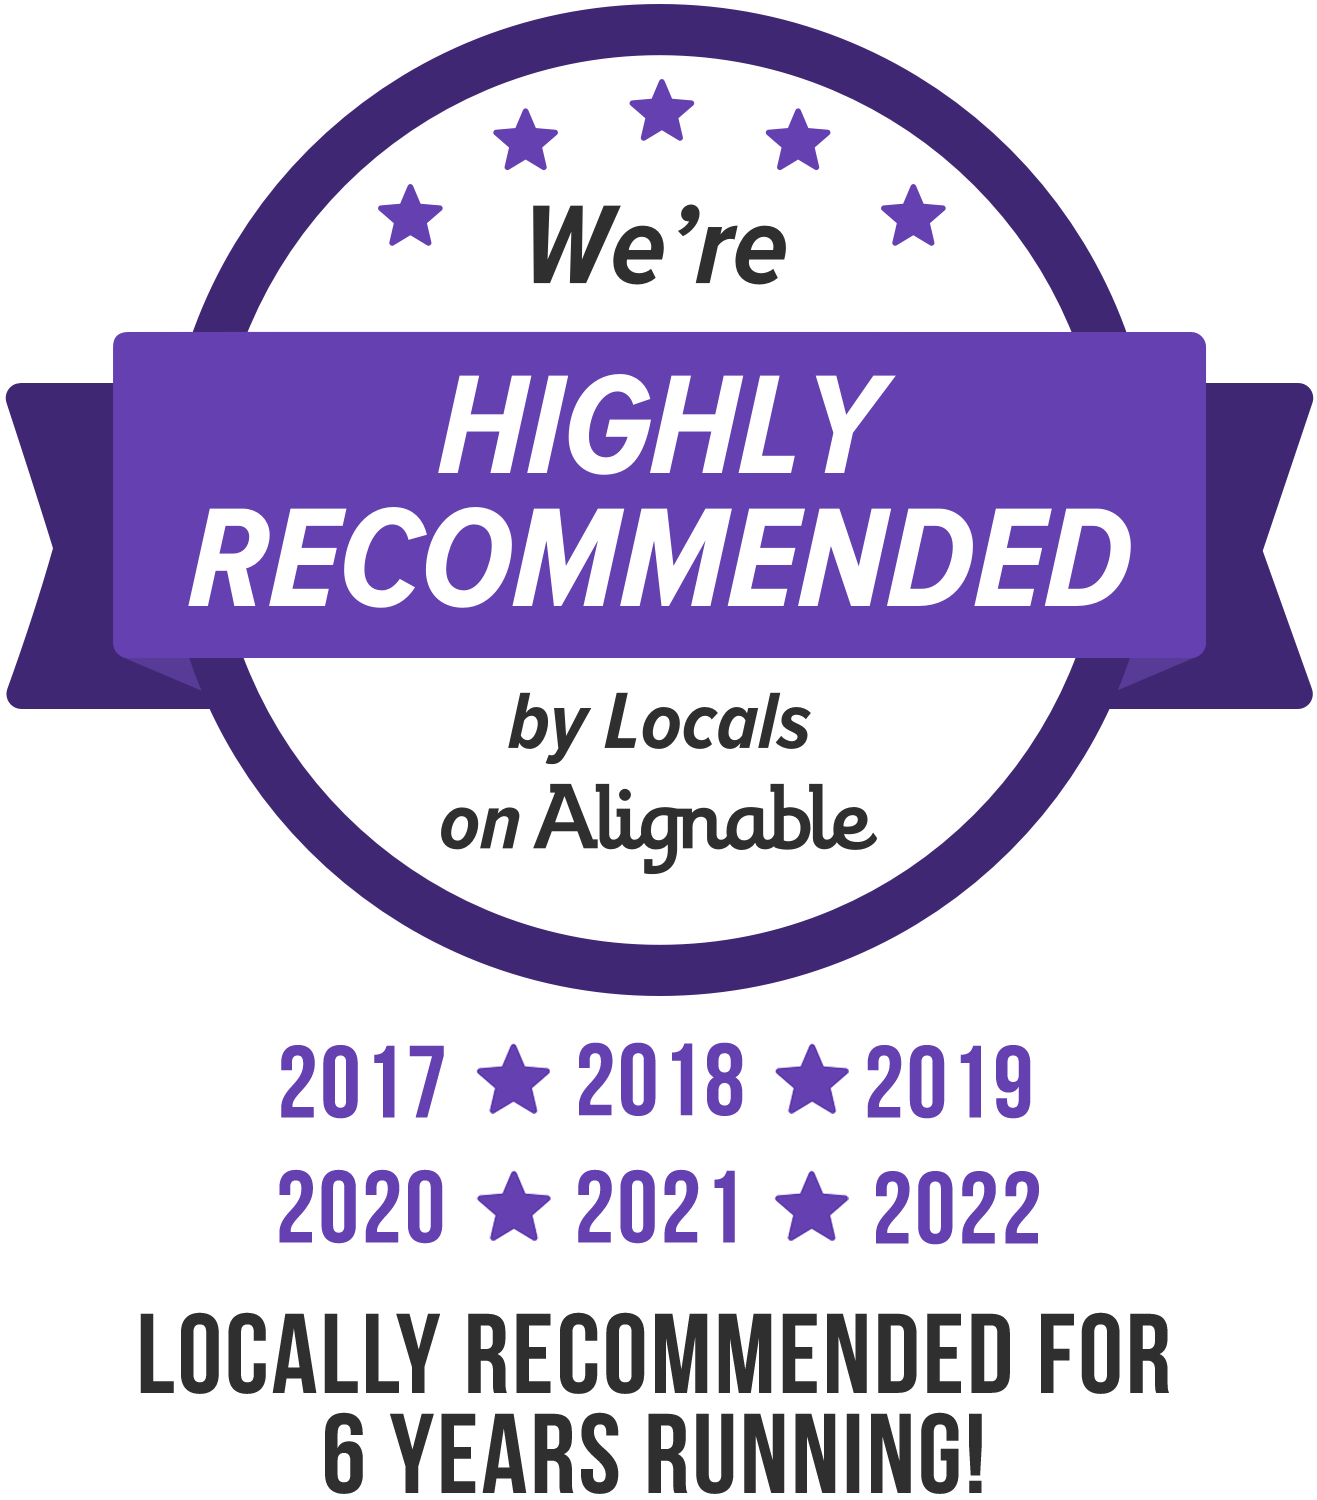 Alignable – Highly Recommended